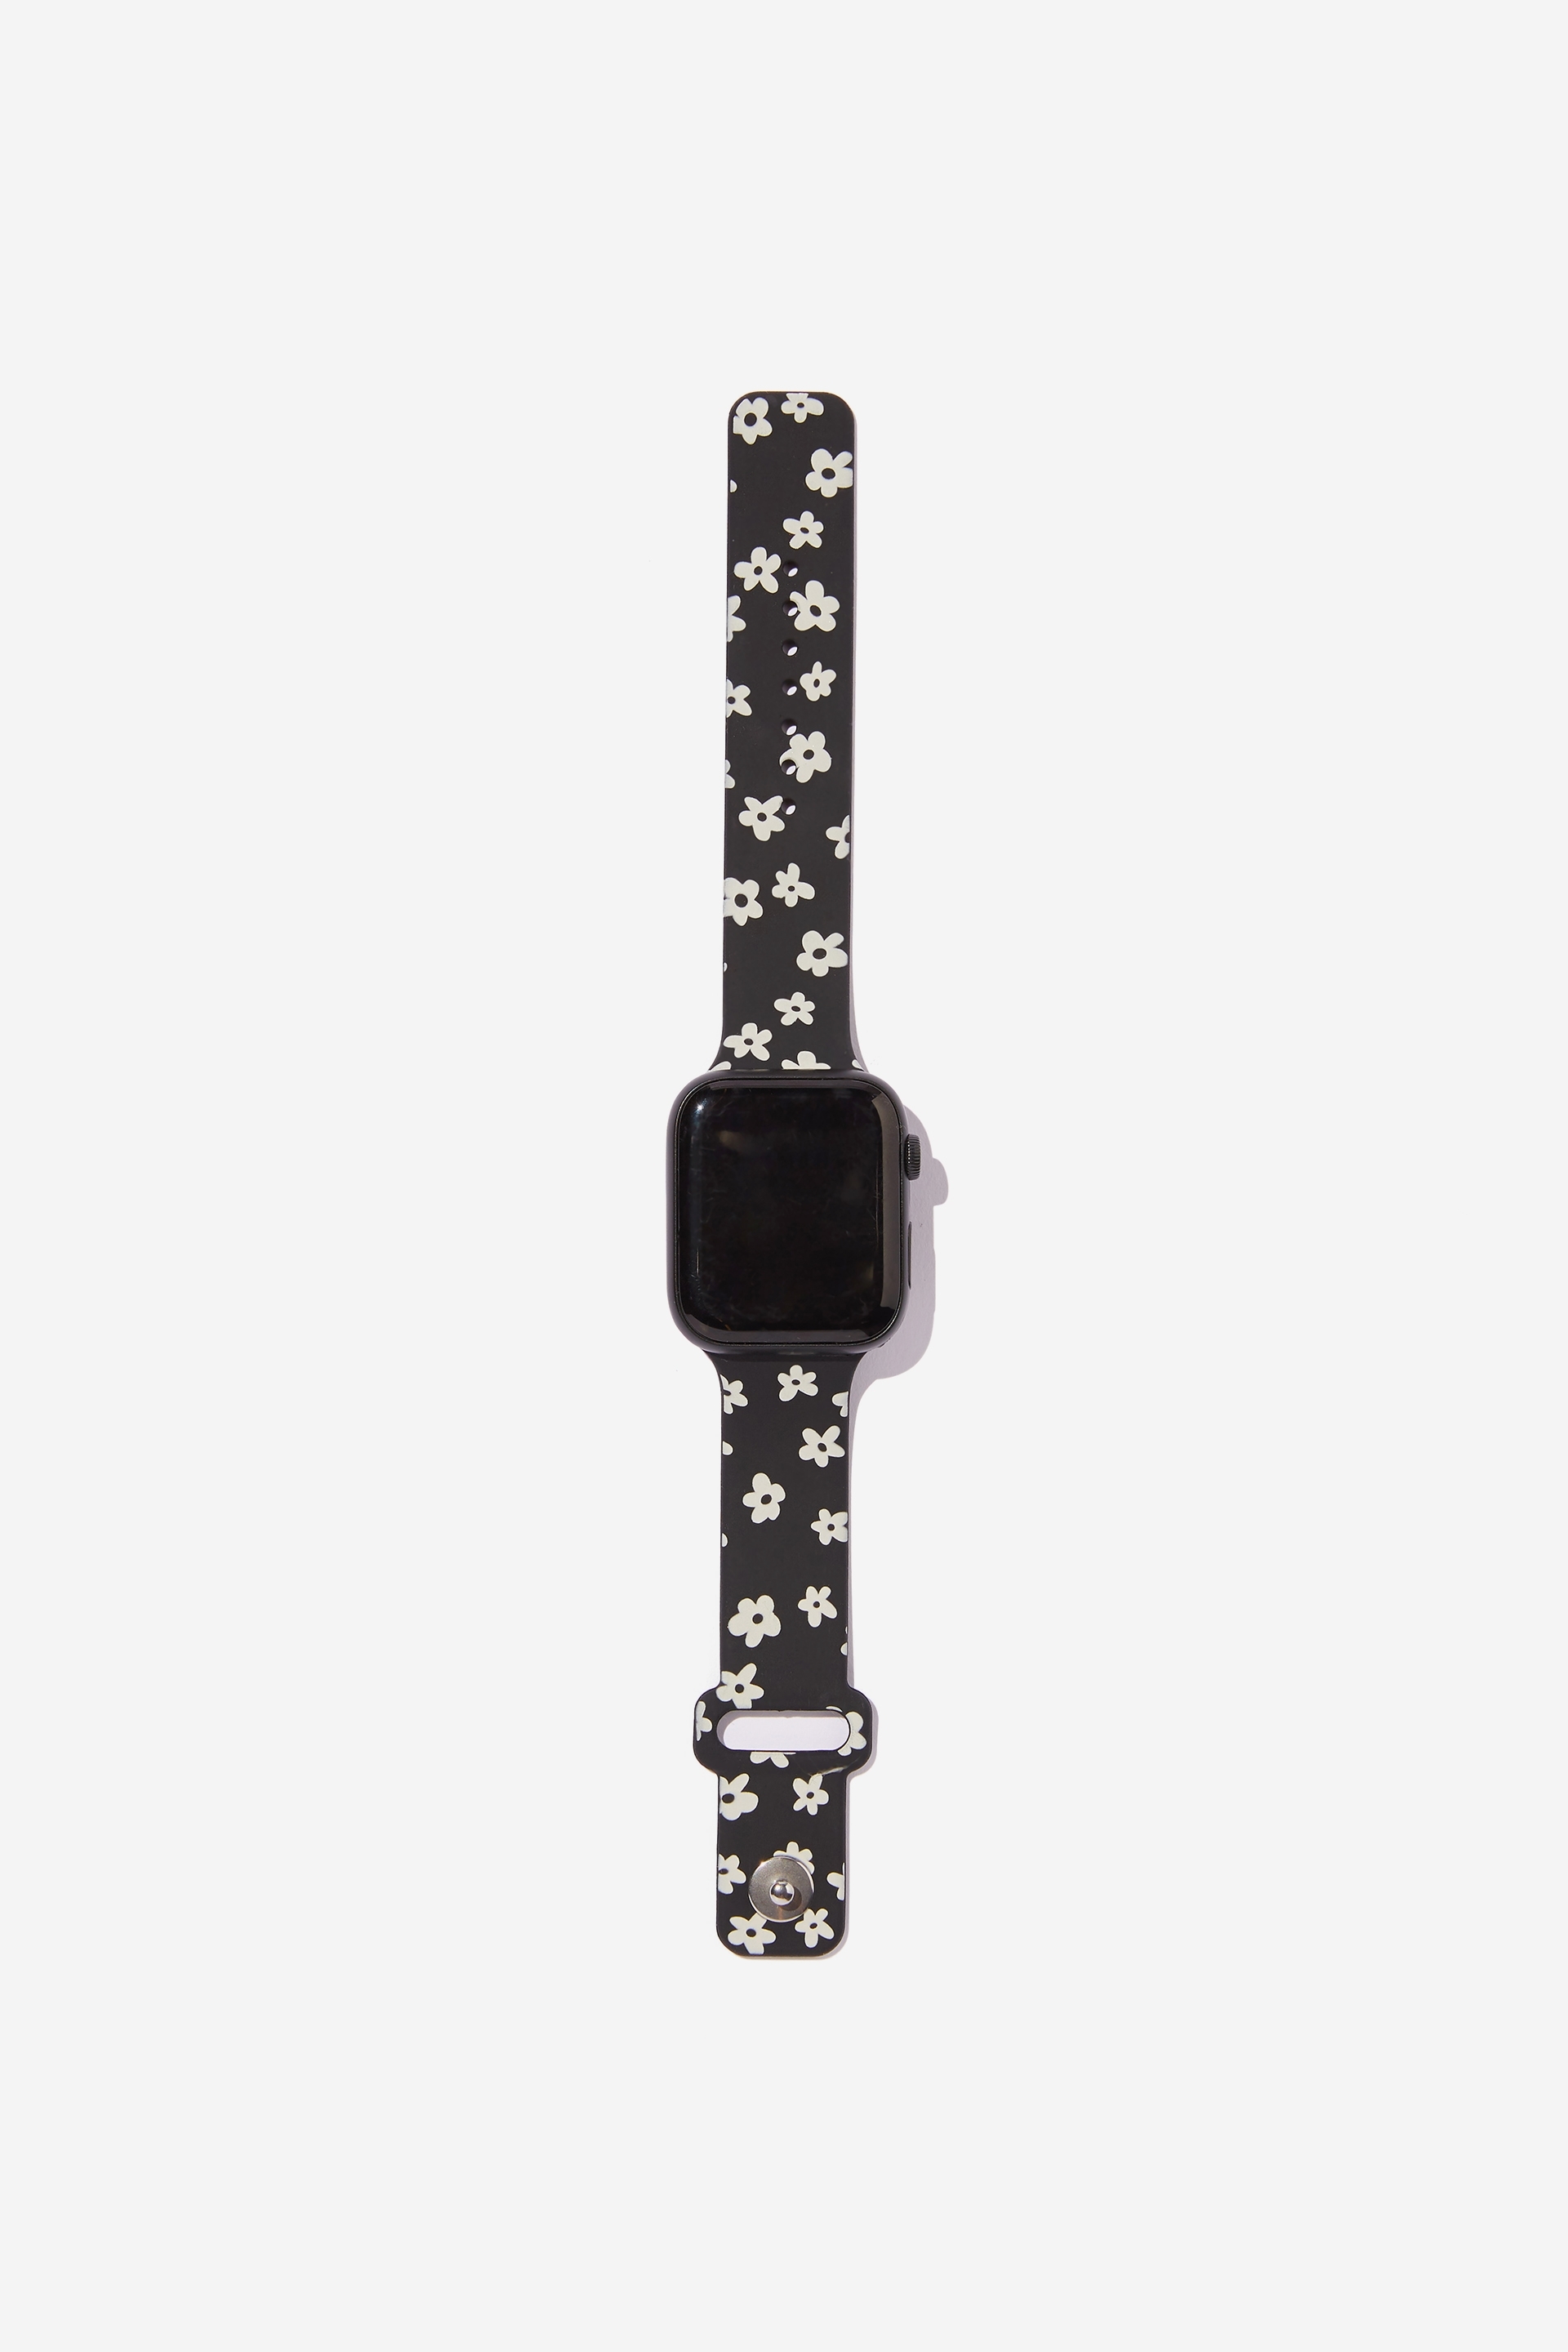 Typo - Strapped Watch Strap - Small daisies b & w